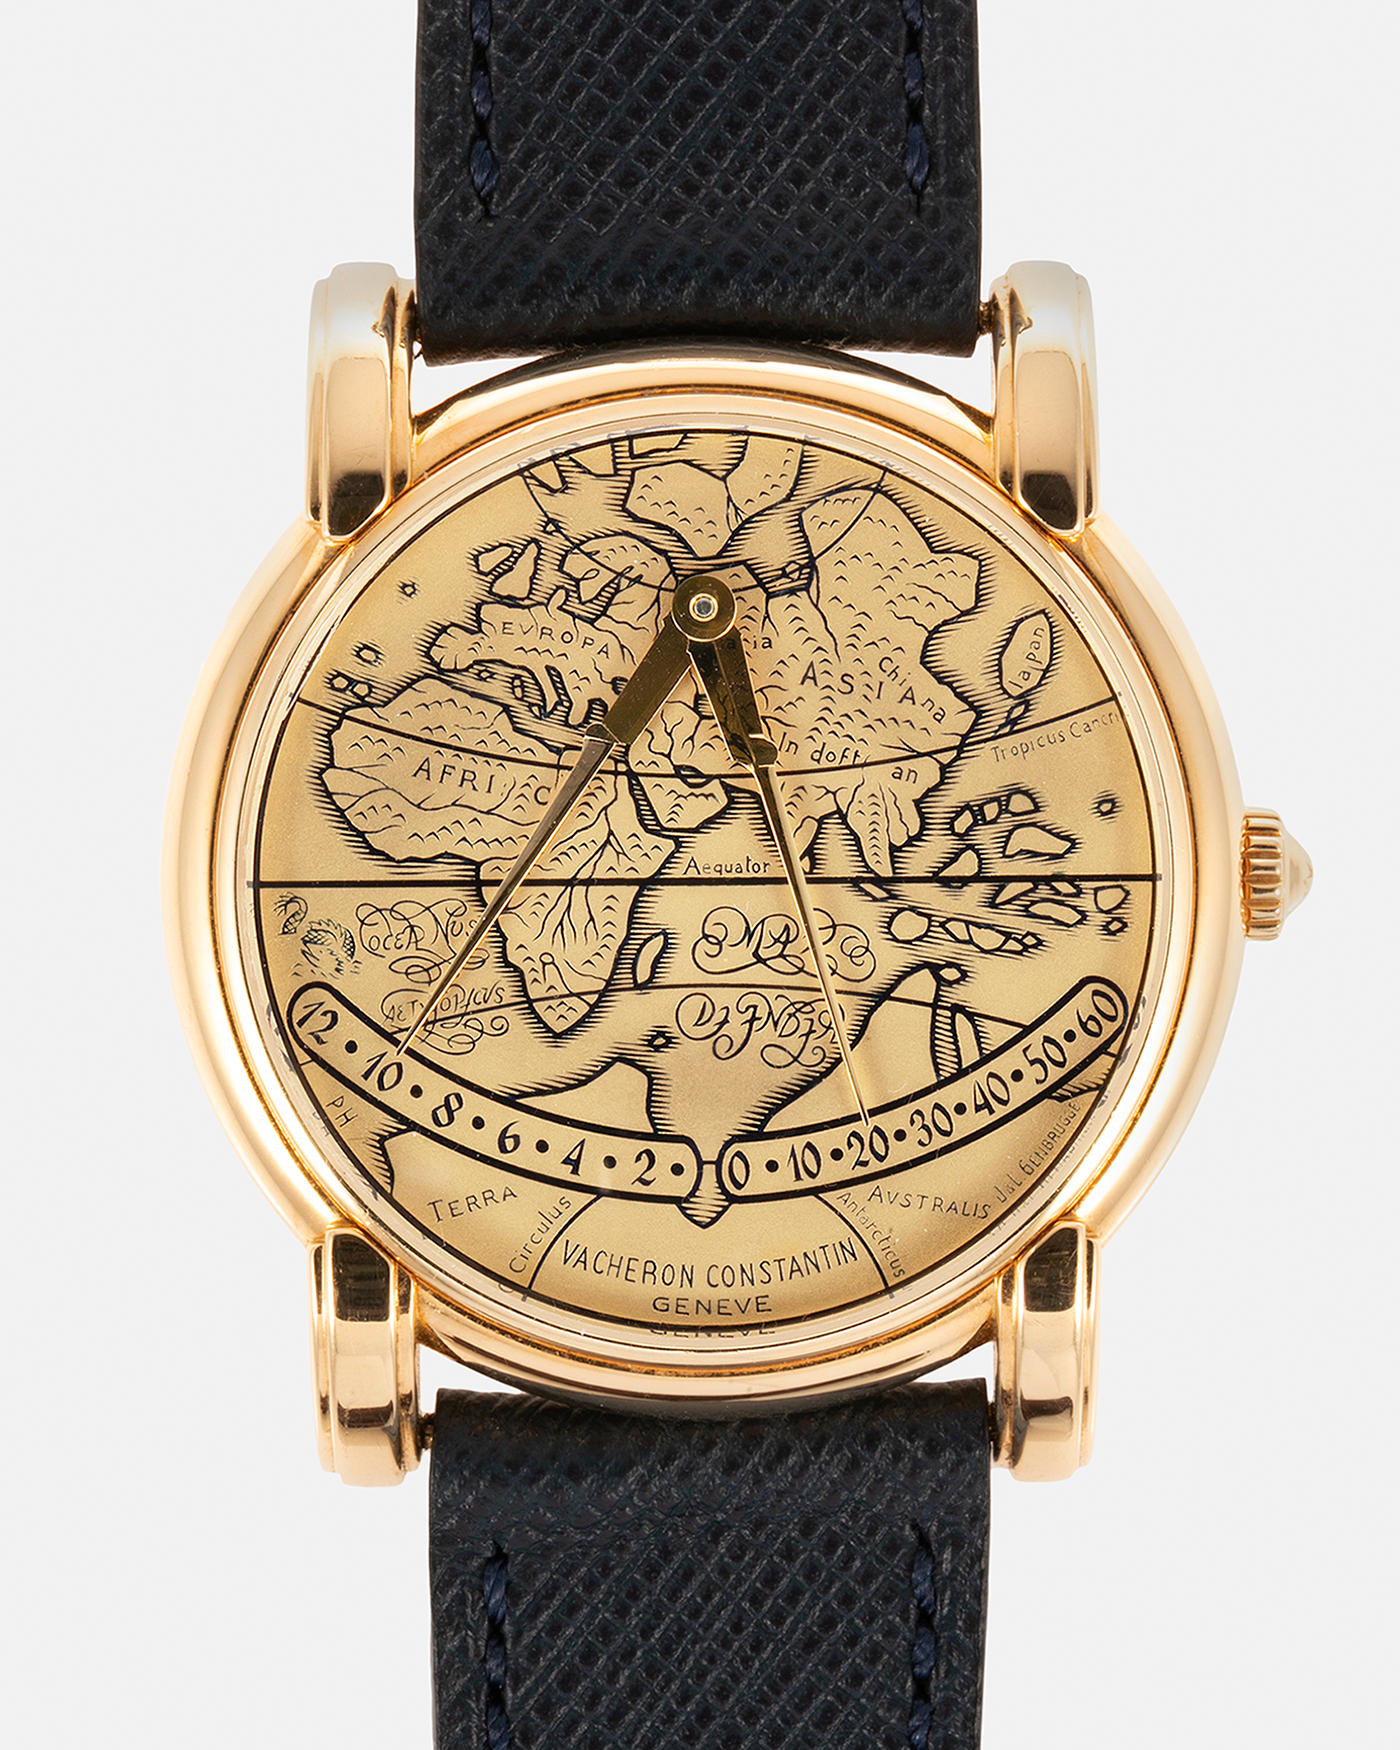 Brand: Vacheron Constantin Year: 1994 Model: Mercator Reference Number: 43050 Material: 18-carat Yellow Gold Case and Engraved Dial filled with Black Enamel Movement: Vacheron Constantin Cal. 1120 M, Self-Winding Case Diameter: 36mm Strap: Molequin Navy Blue Textured Calf Leather Strap with Signed 18-carat Yellow Gold Deployant